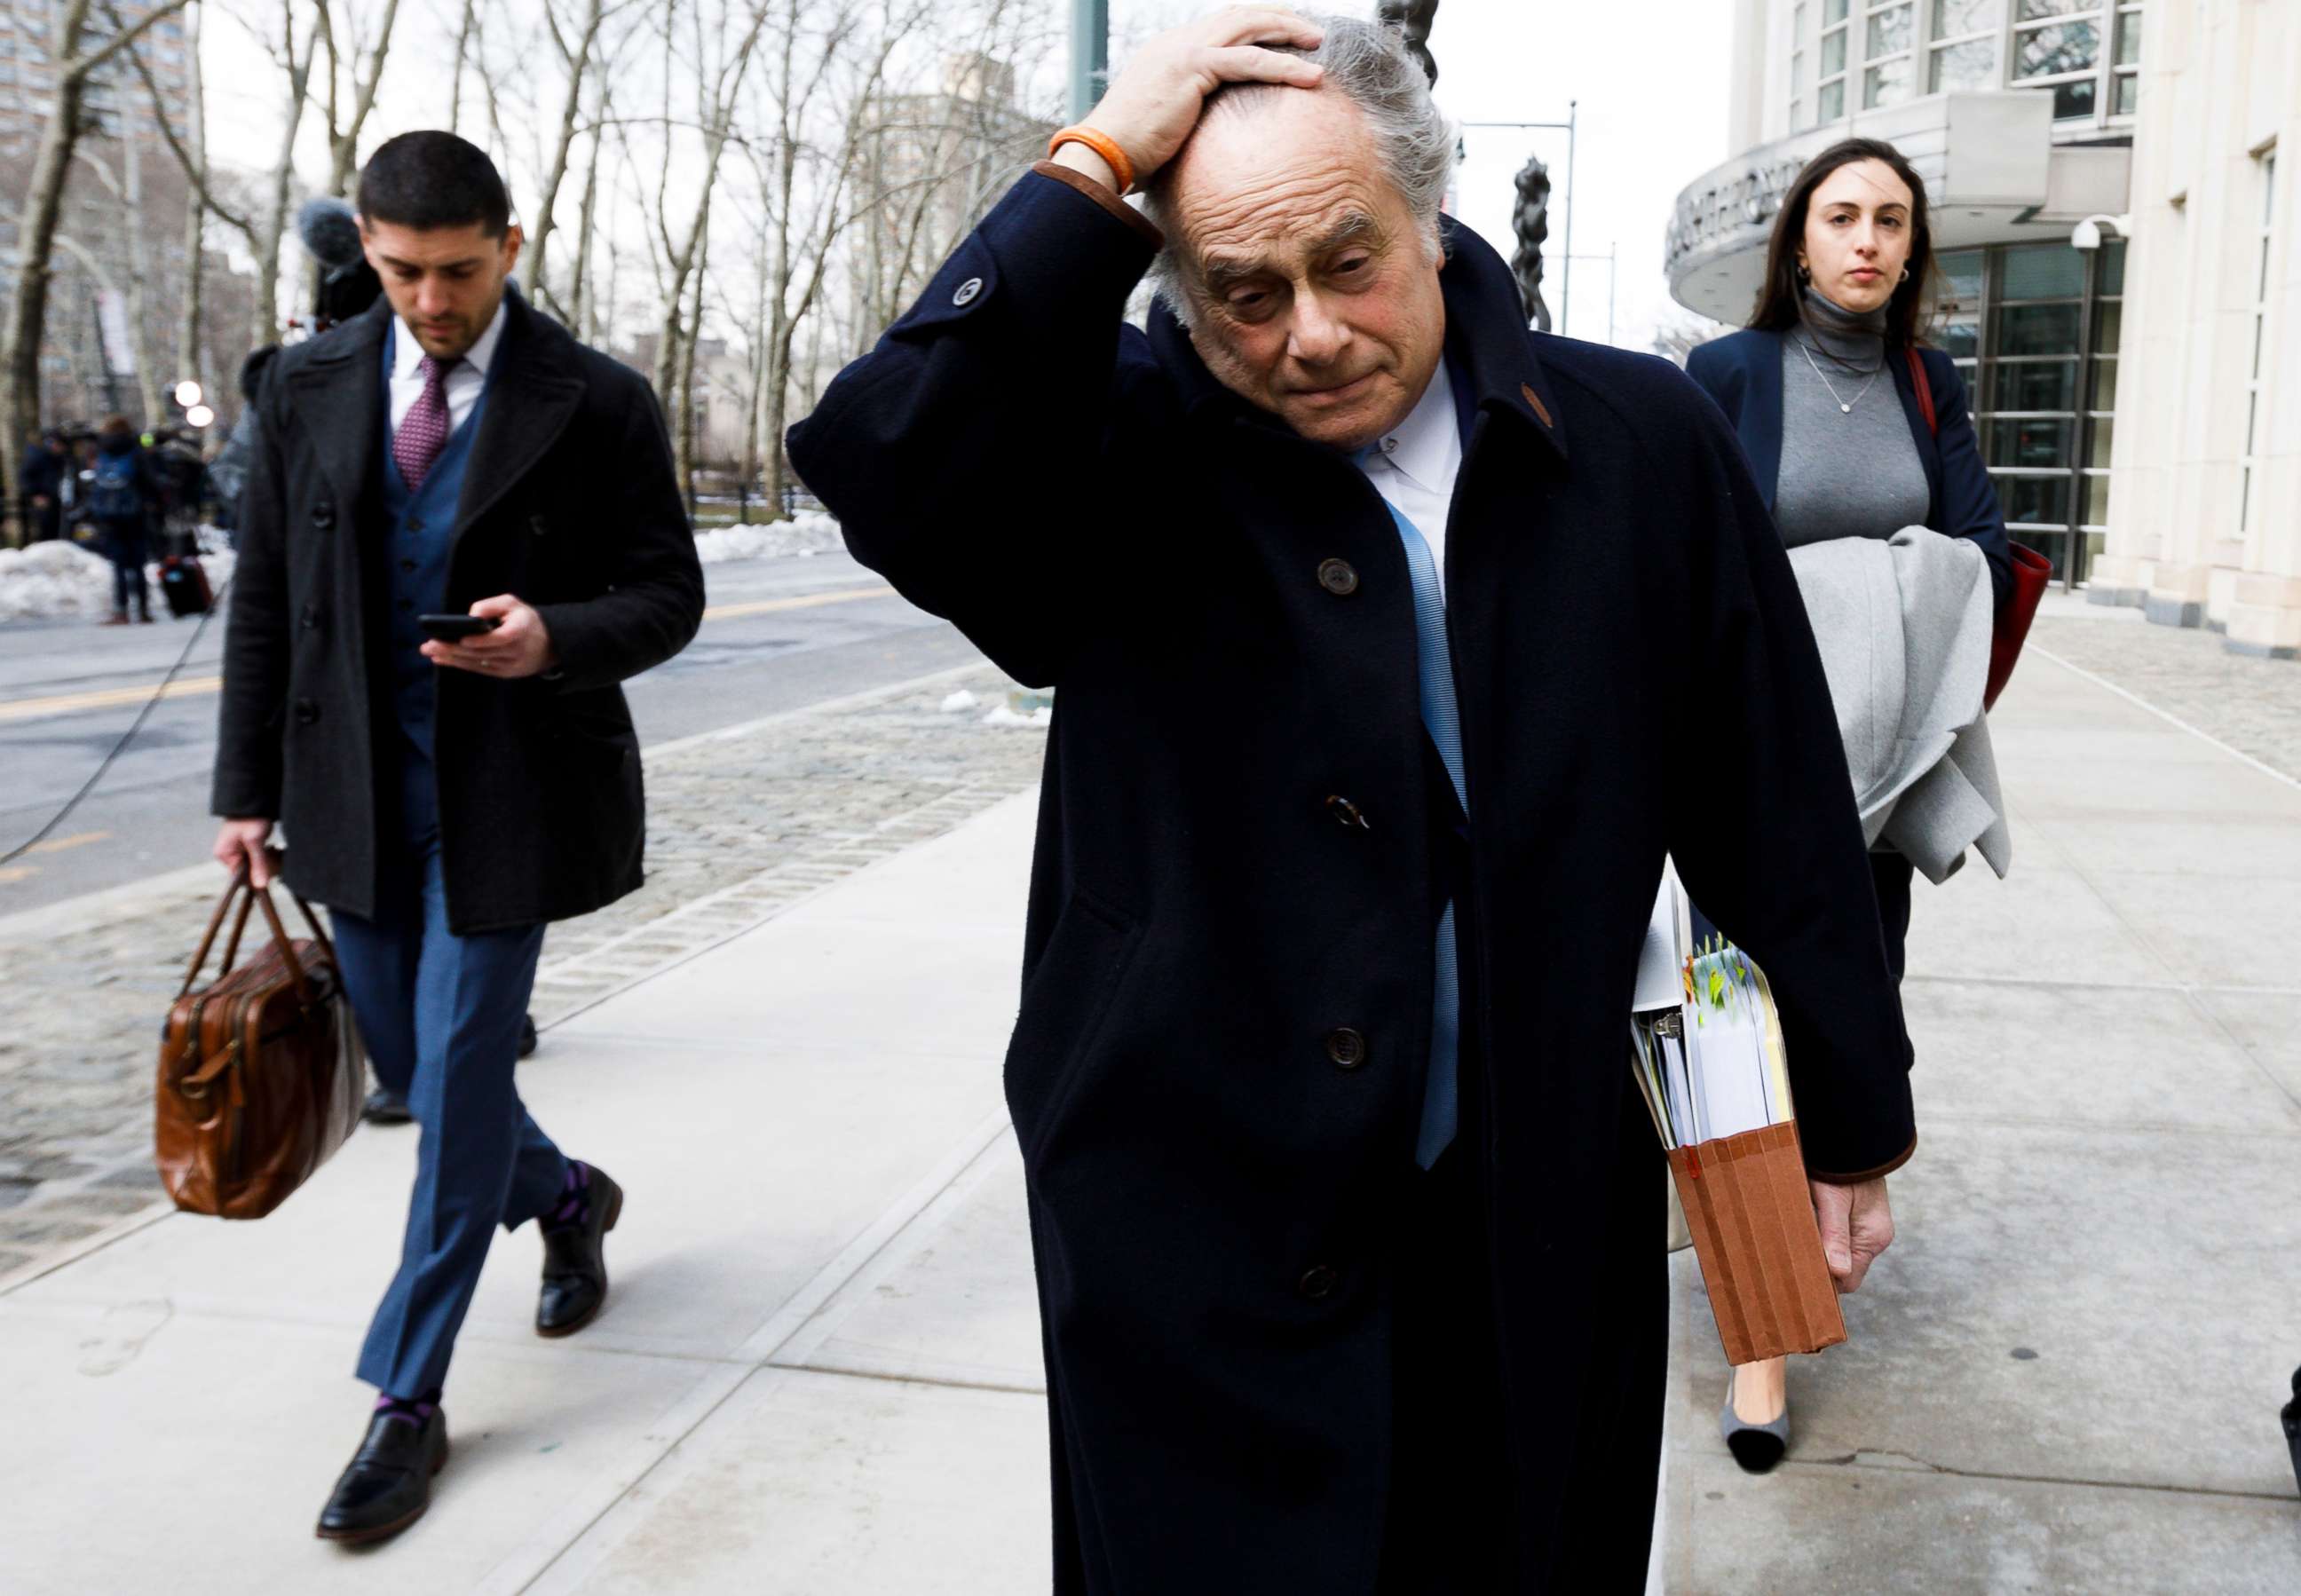 PHOTO: Attorney Benjamin Brafman leaves a United States Courthouse after his client, former pharmaceutical executive Martin Shkreli, was sentenced to seven years in prison for securities fraud in New York, New York, March 9, 2018.